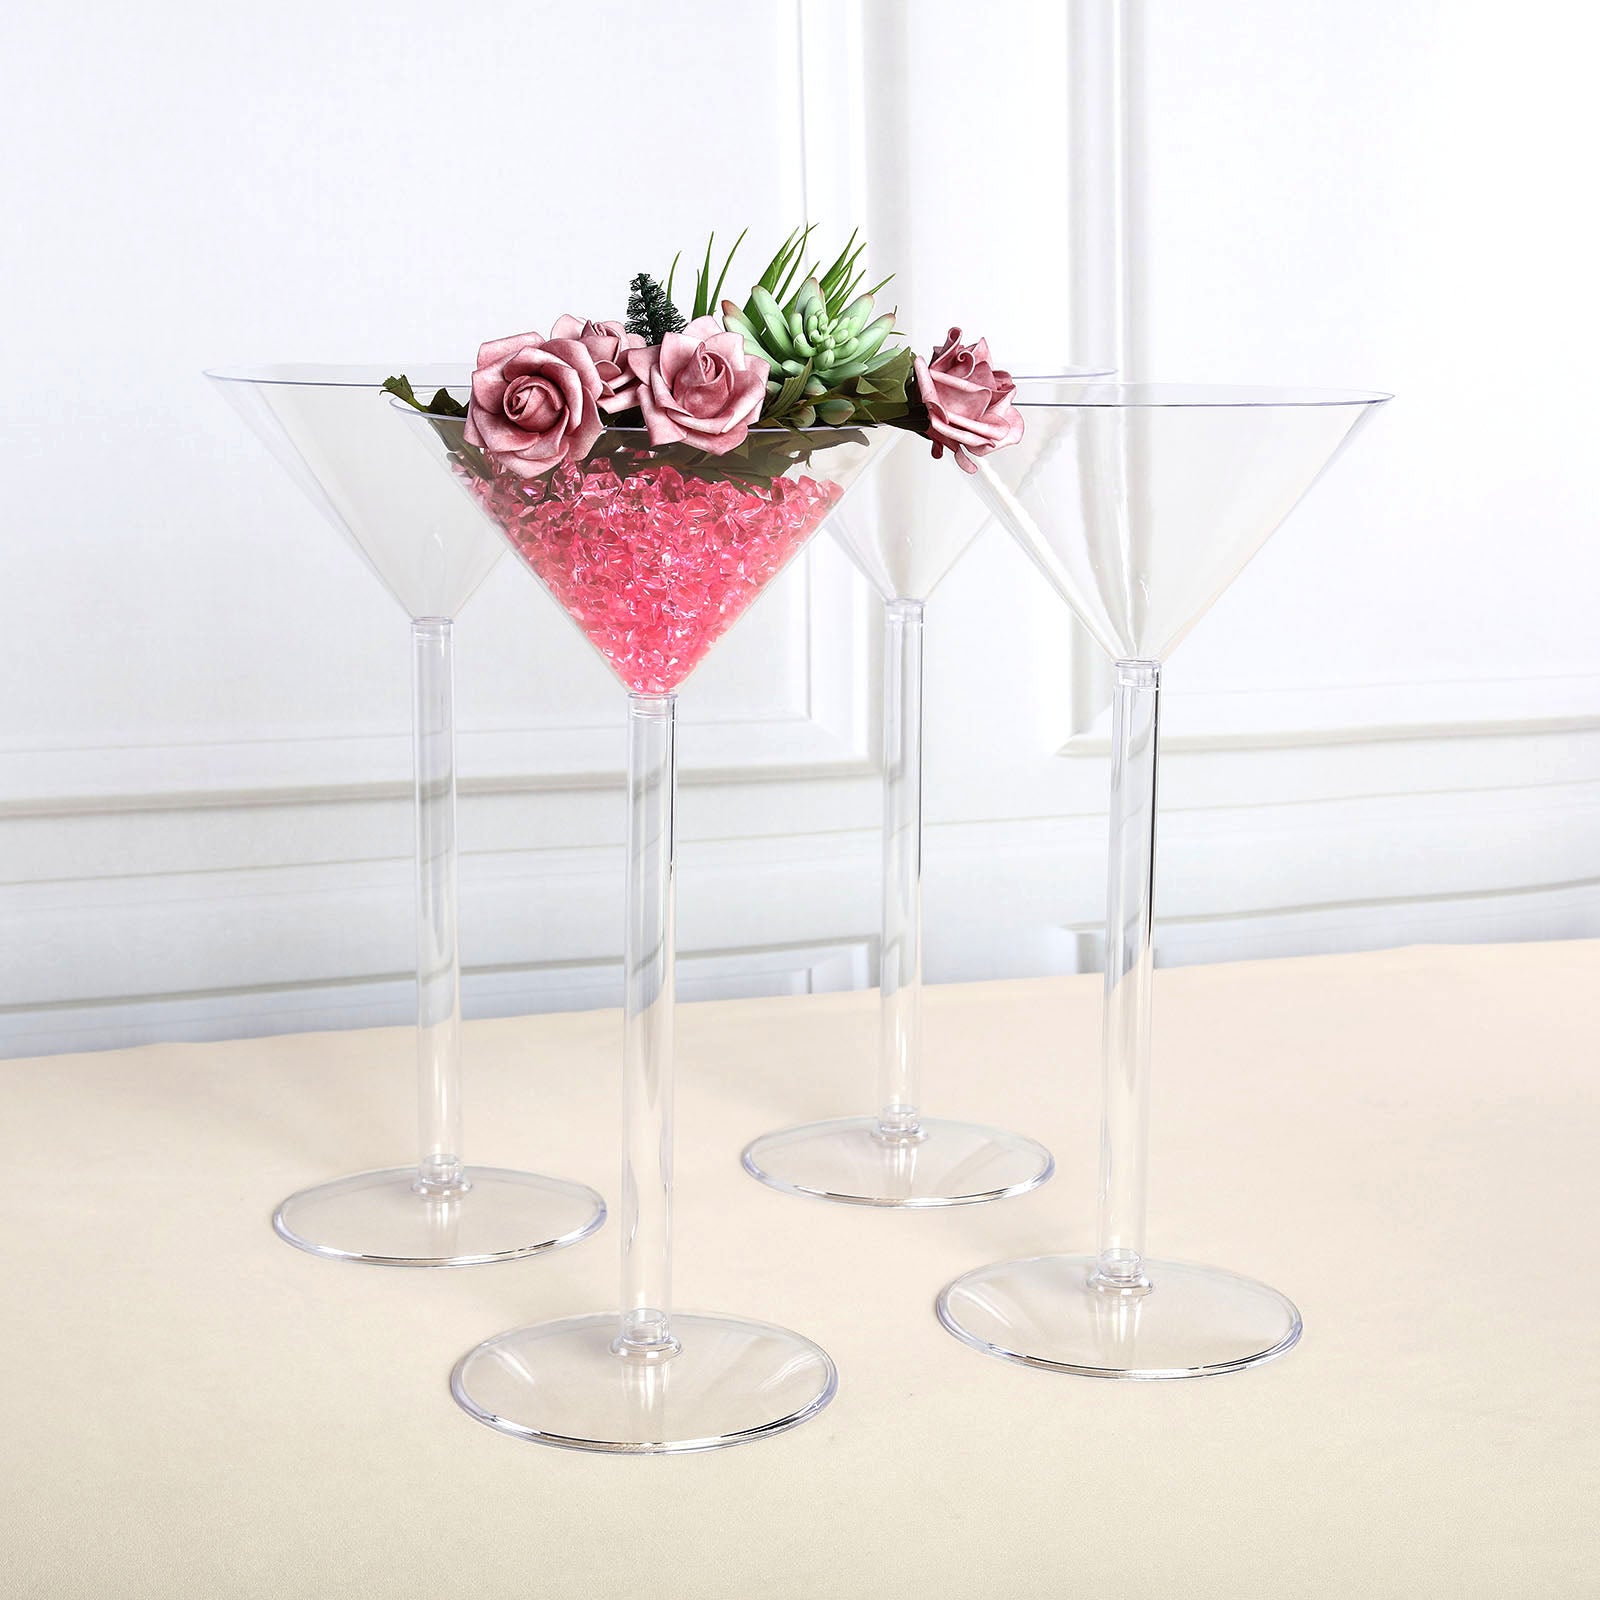 Stemmed Martini Glass - Solid